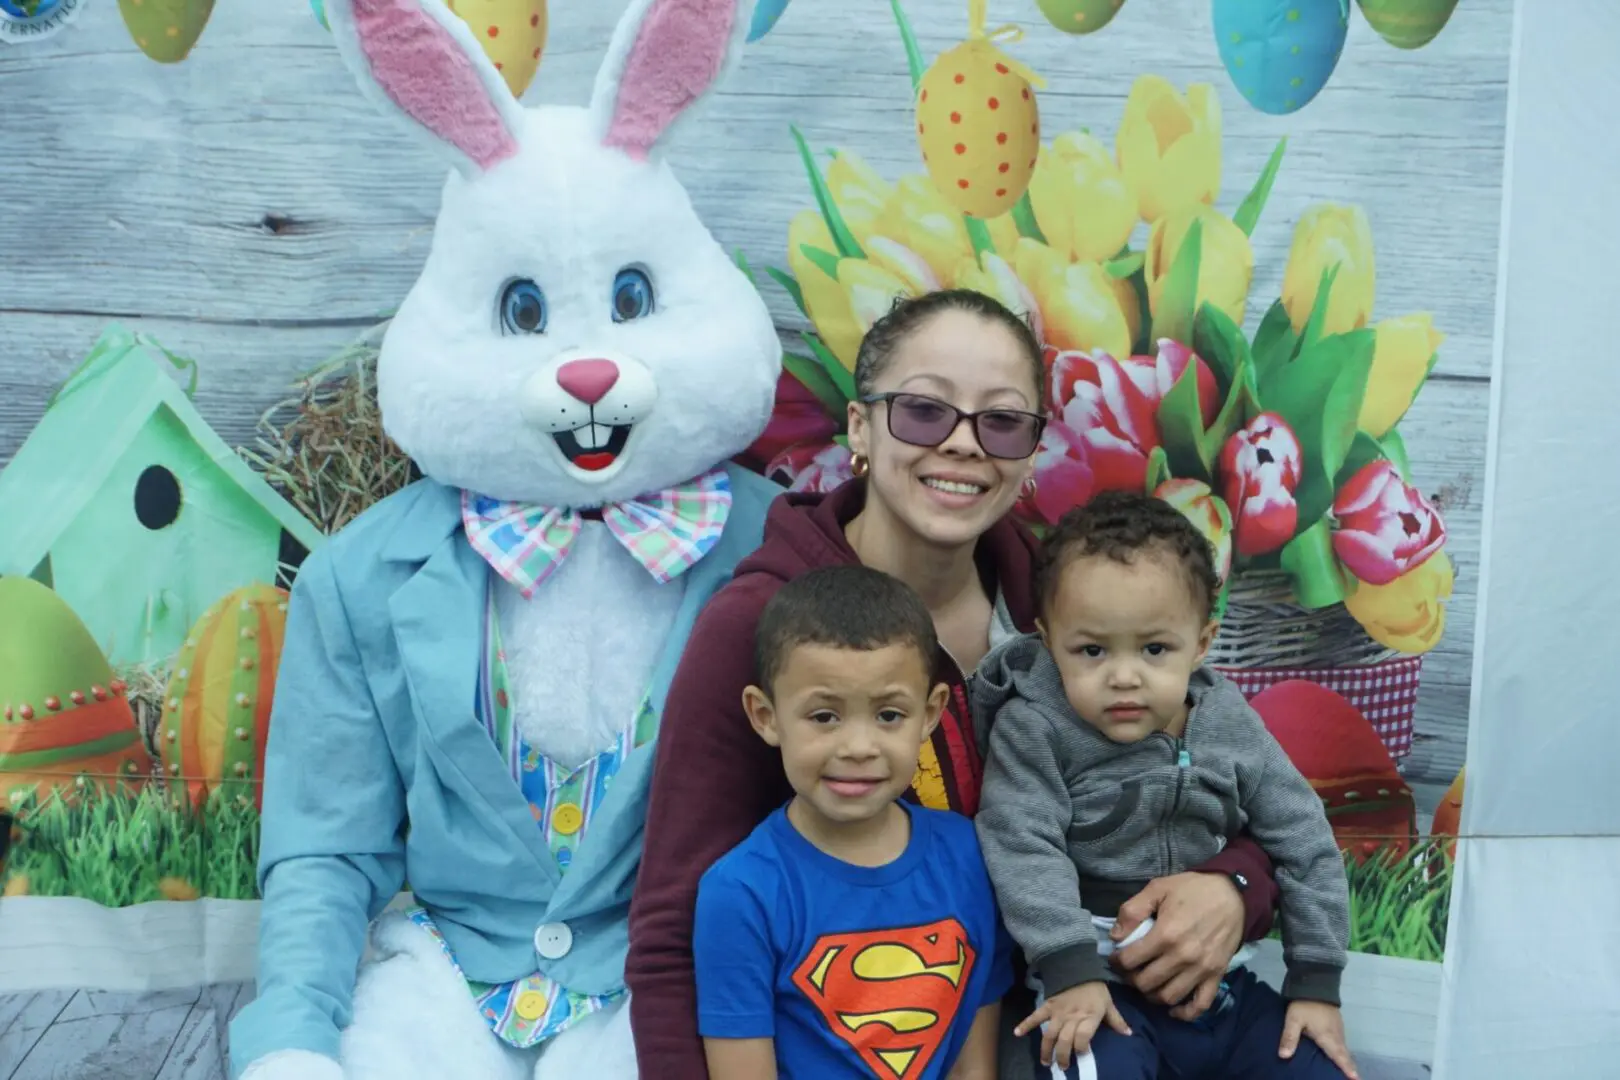 The bunny mascot together with a mother and her two sons